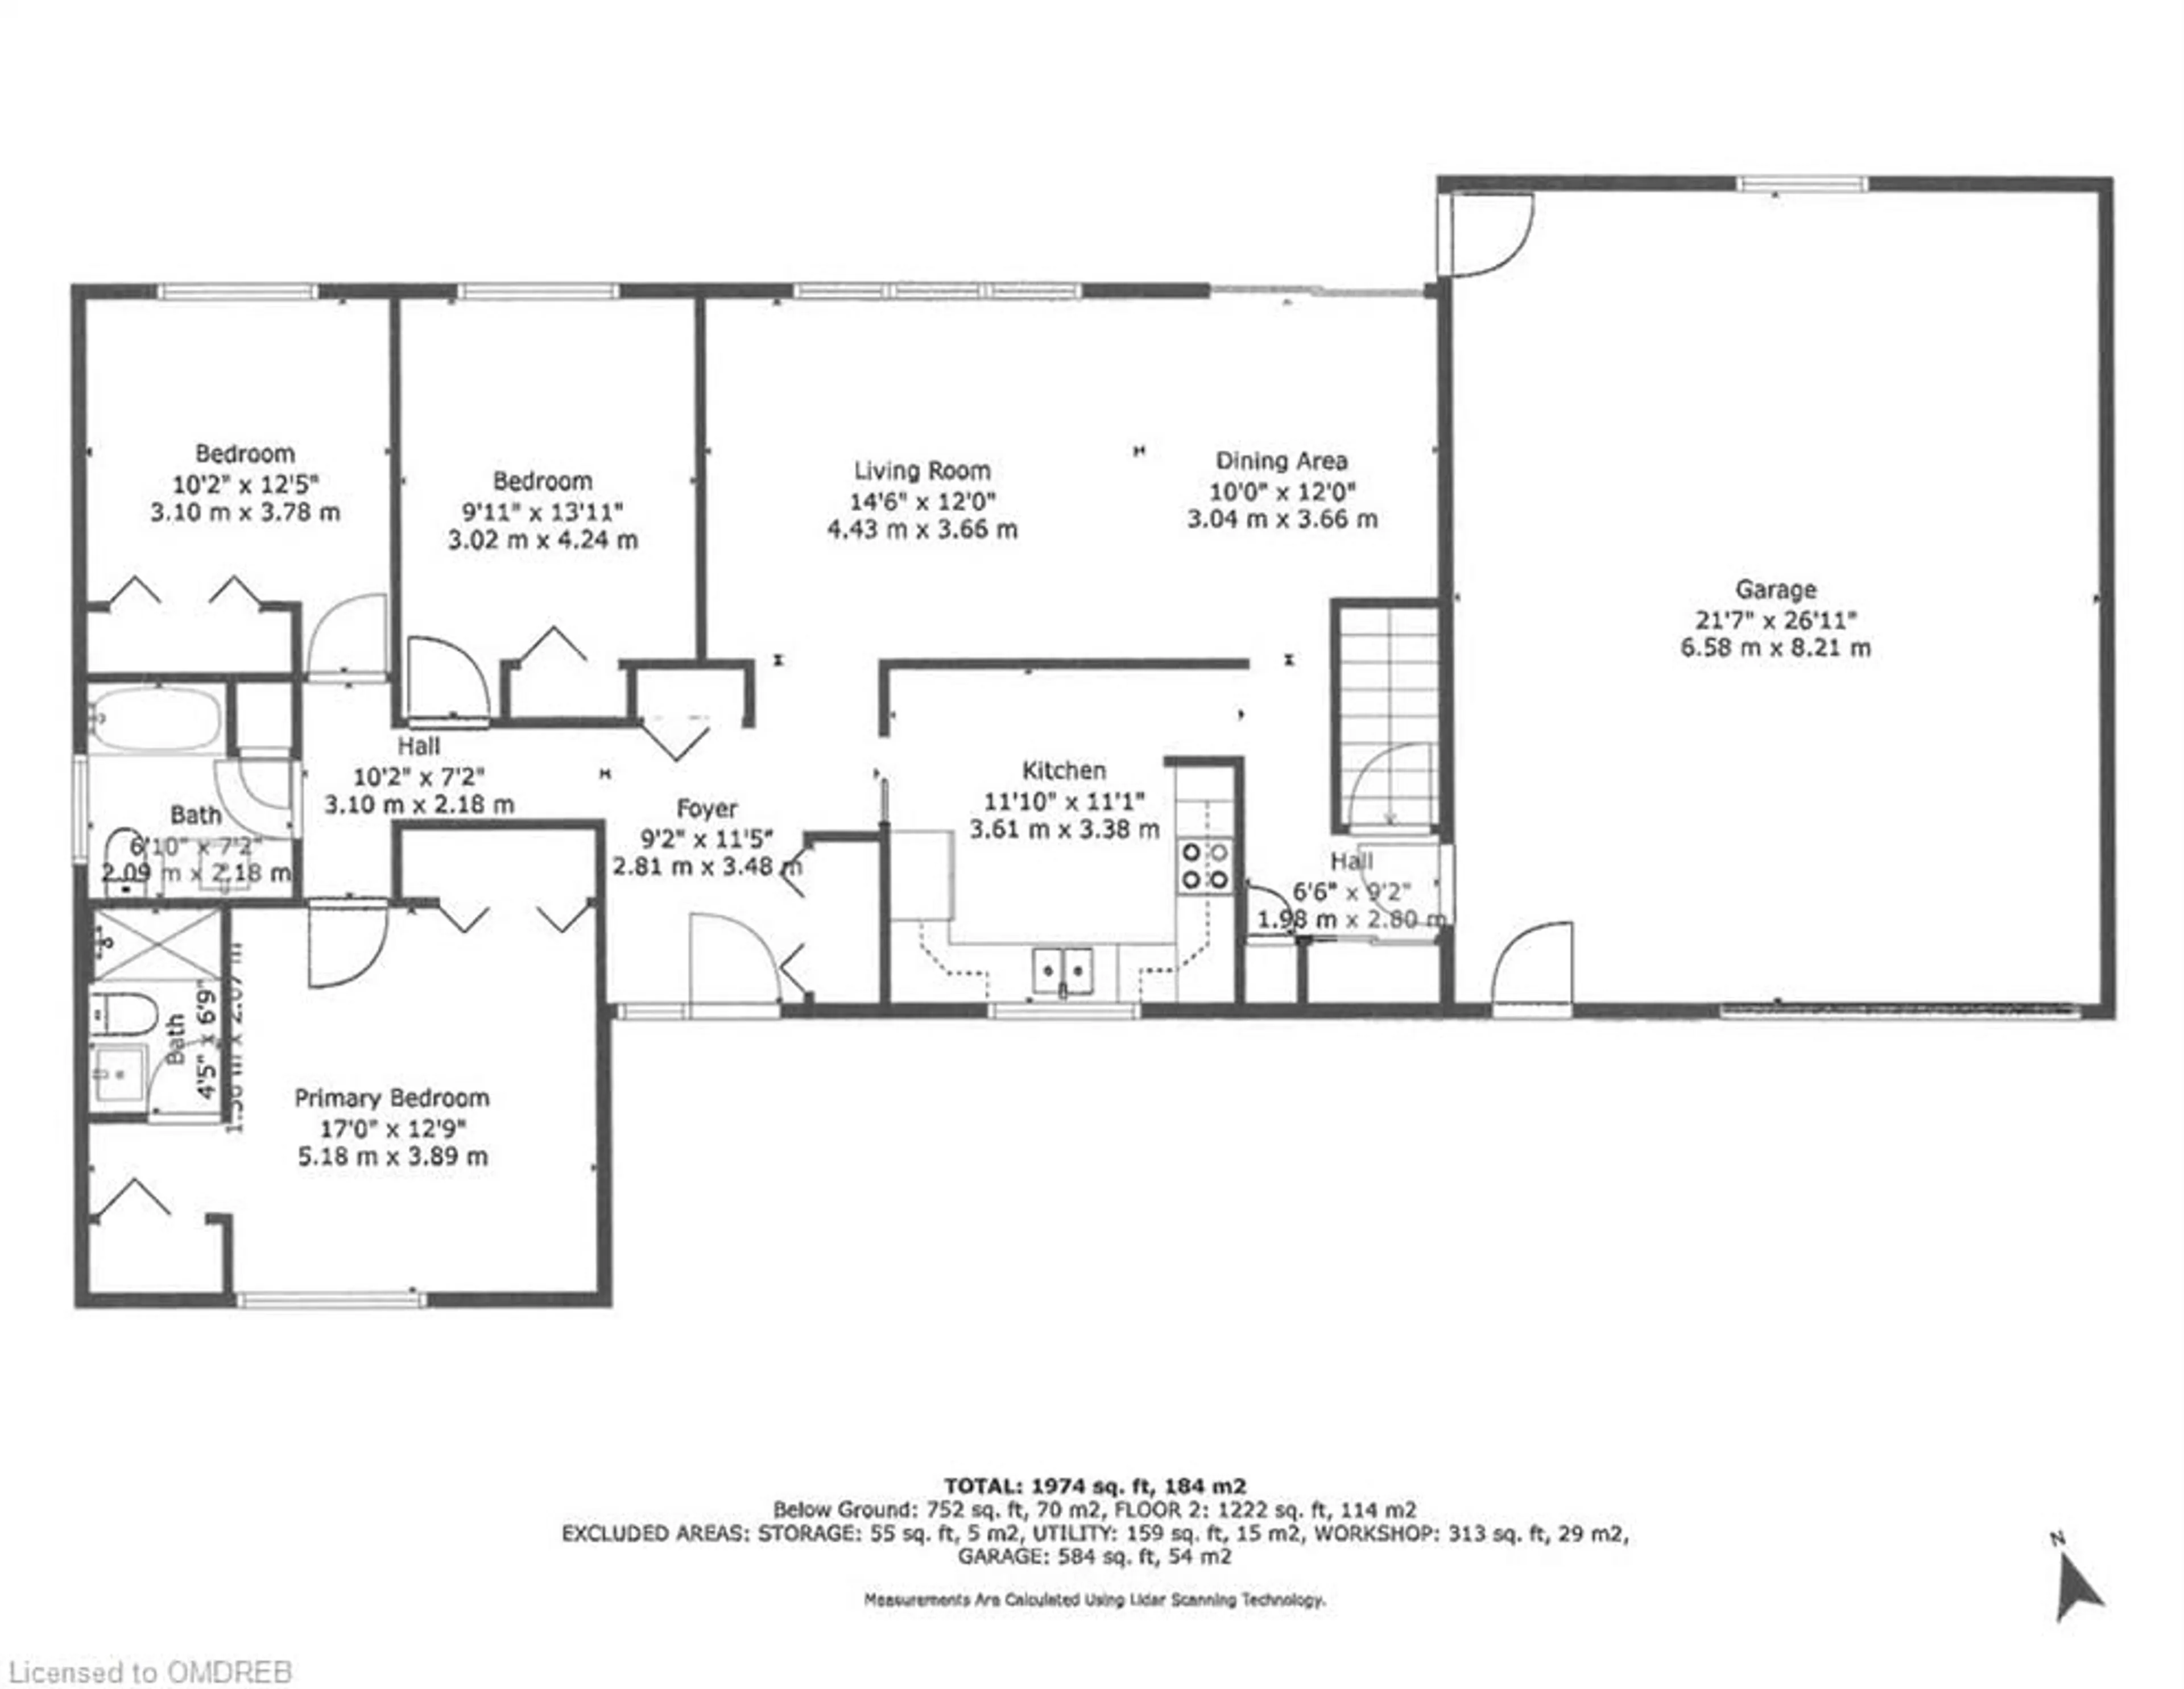 Floor plan for 863 South St, Warsaw Ontario K0L 3A0